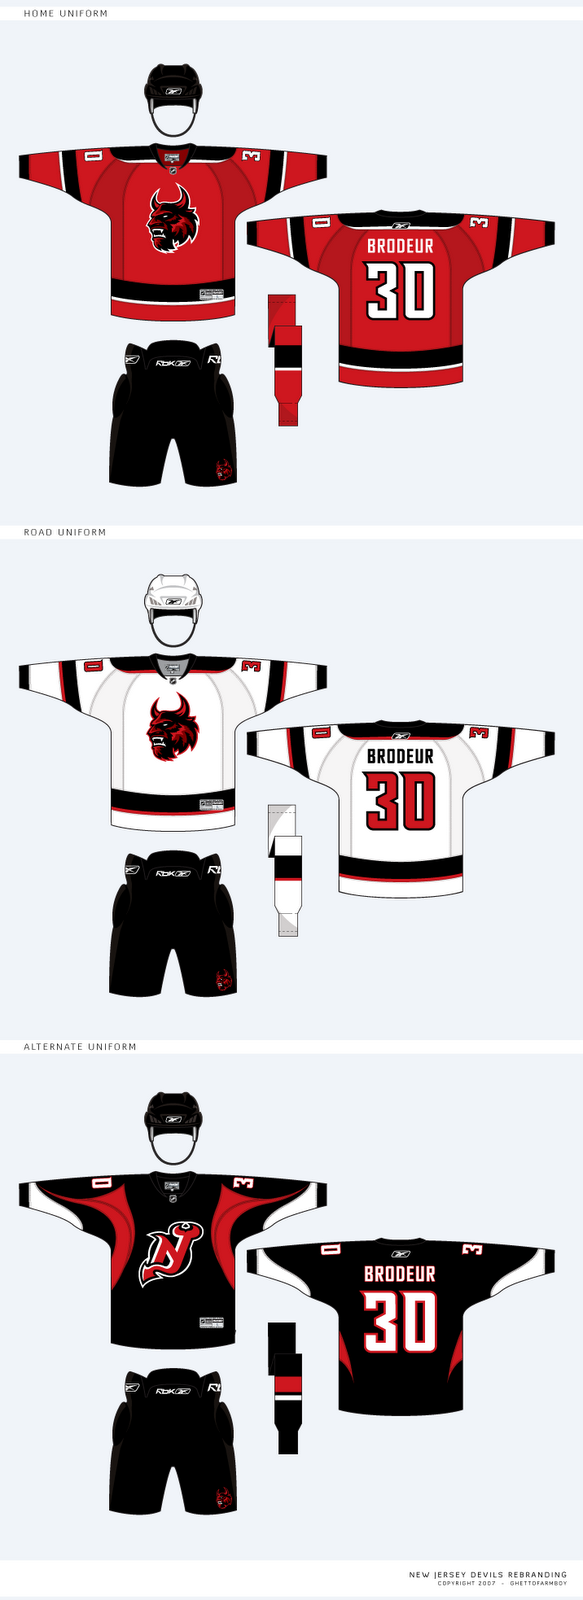 New Jersey Devils: Finally, a sweater concept worth considering